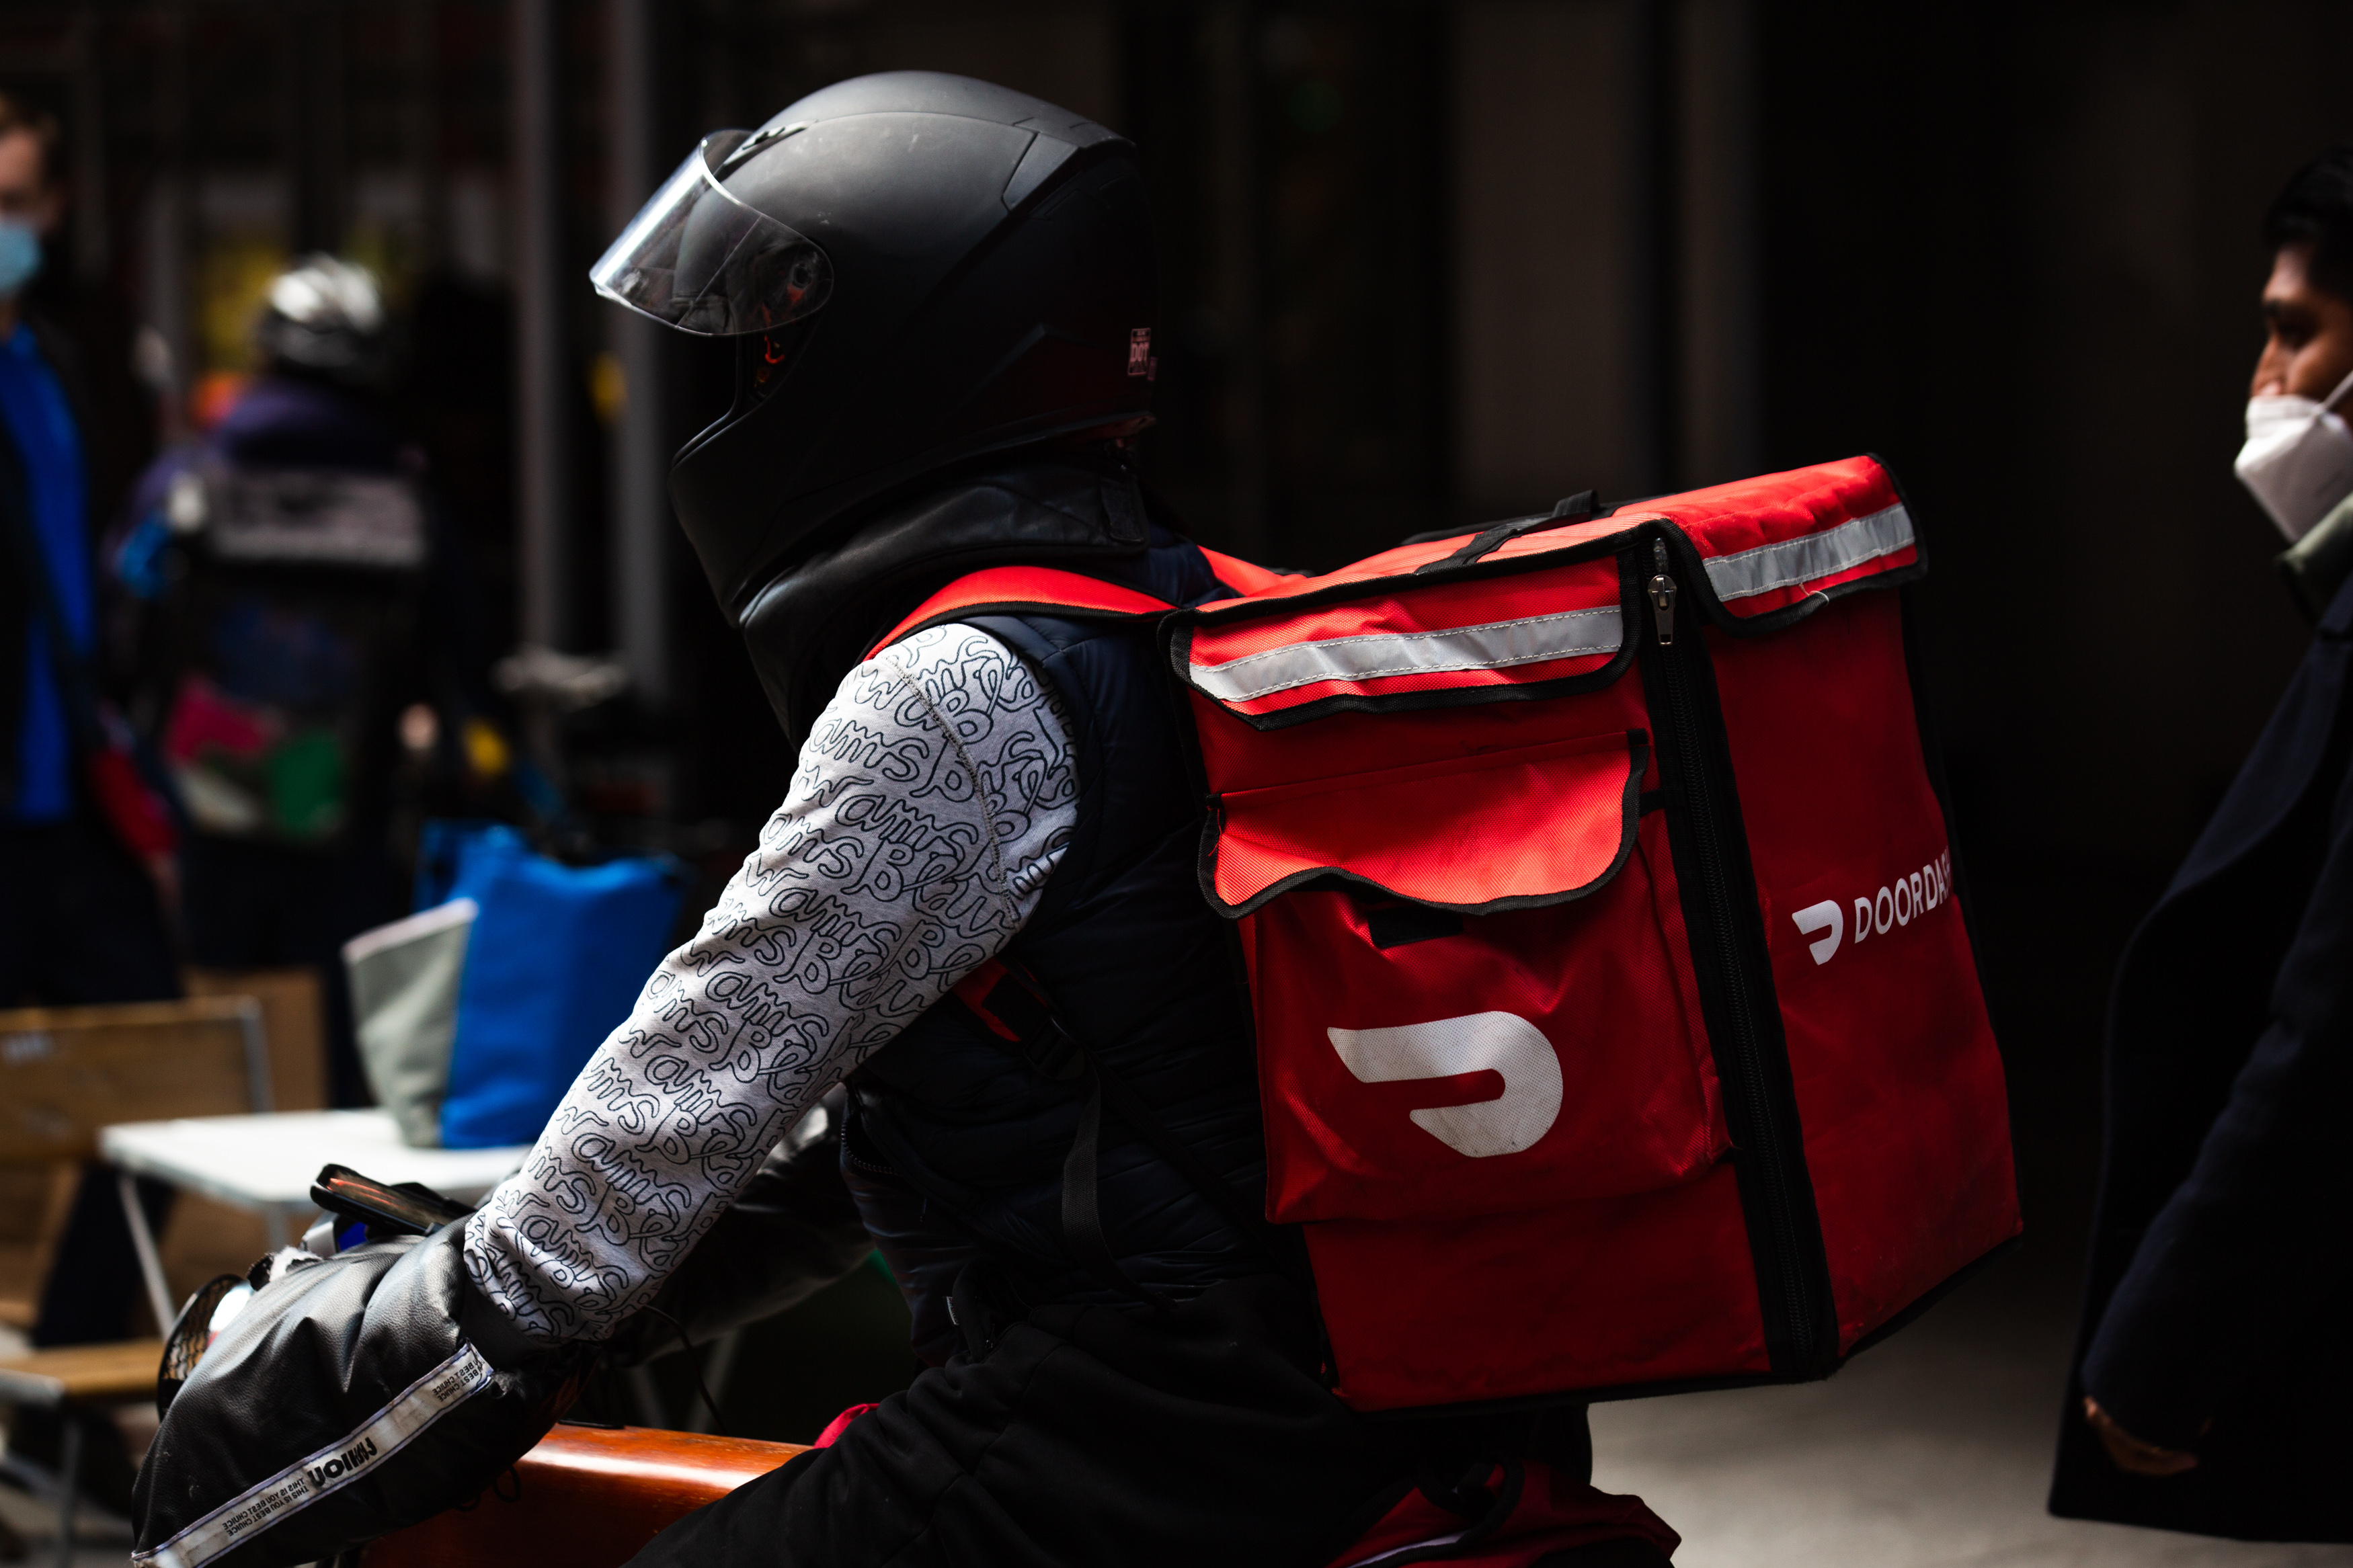 Closeup on a delivery person with a black motorcycle helmet and a Doordash backpack riding outside